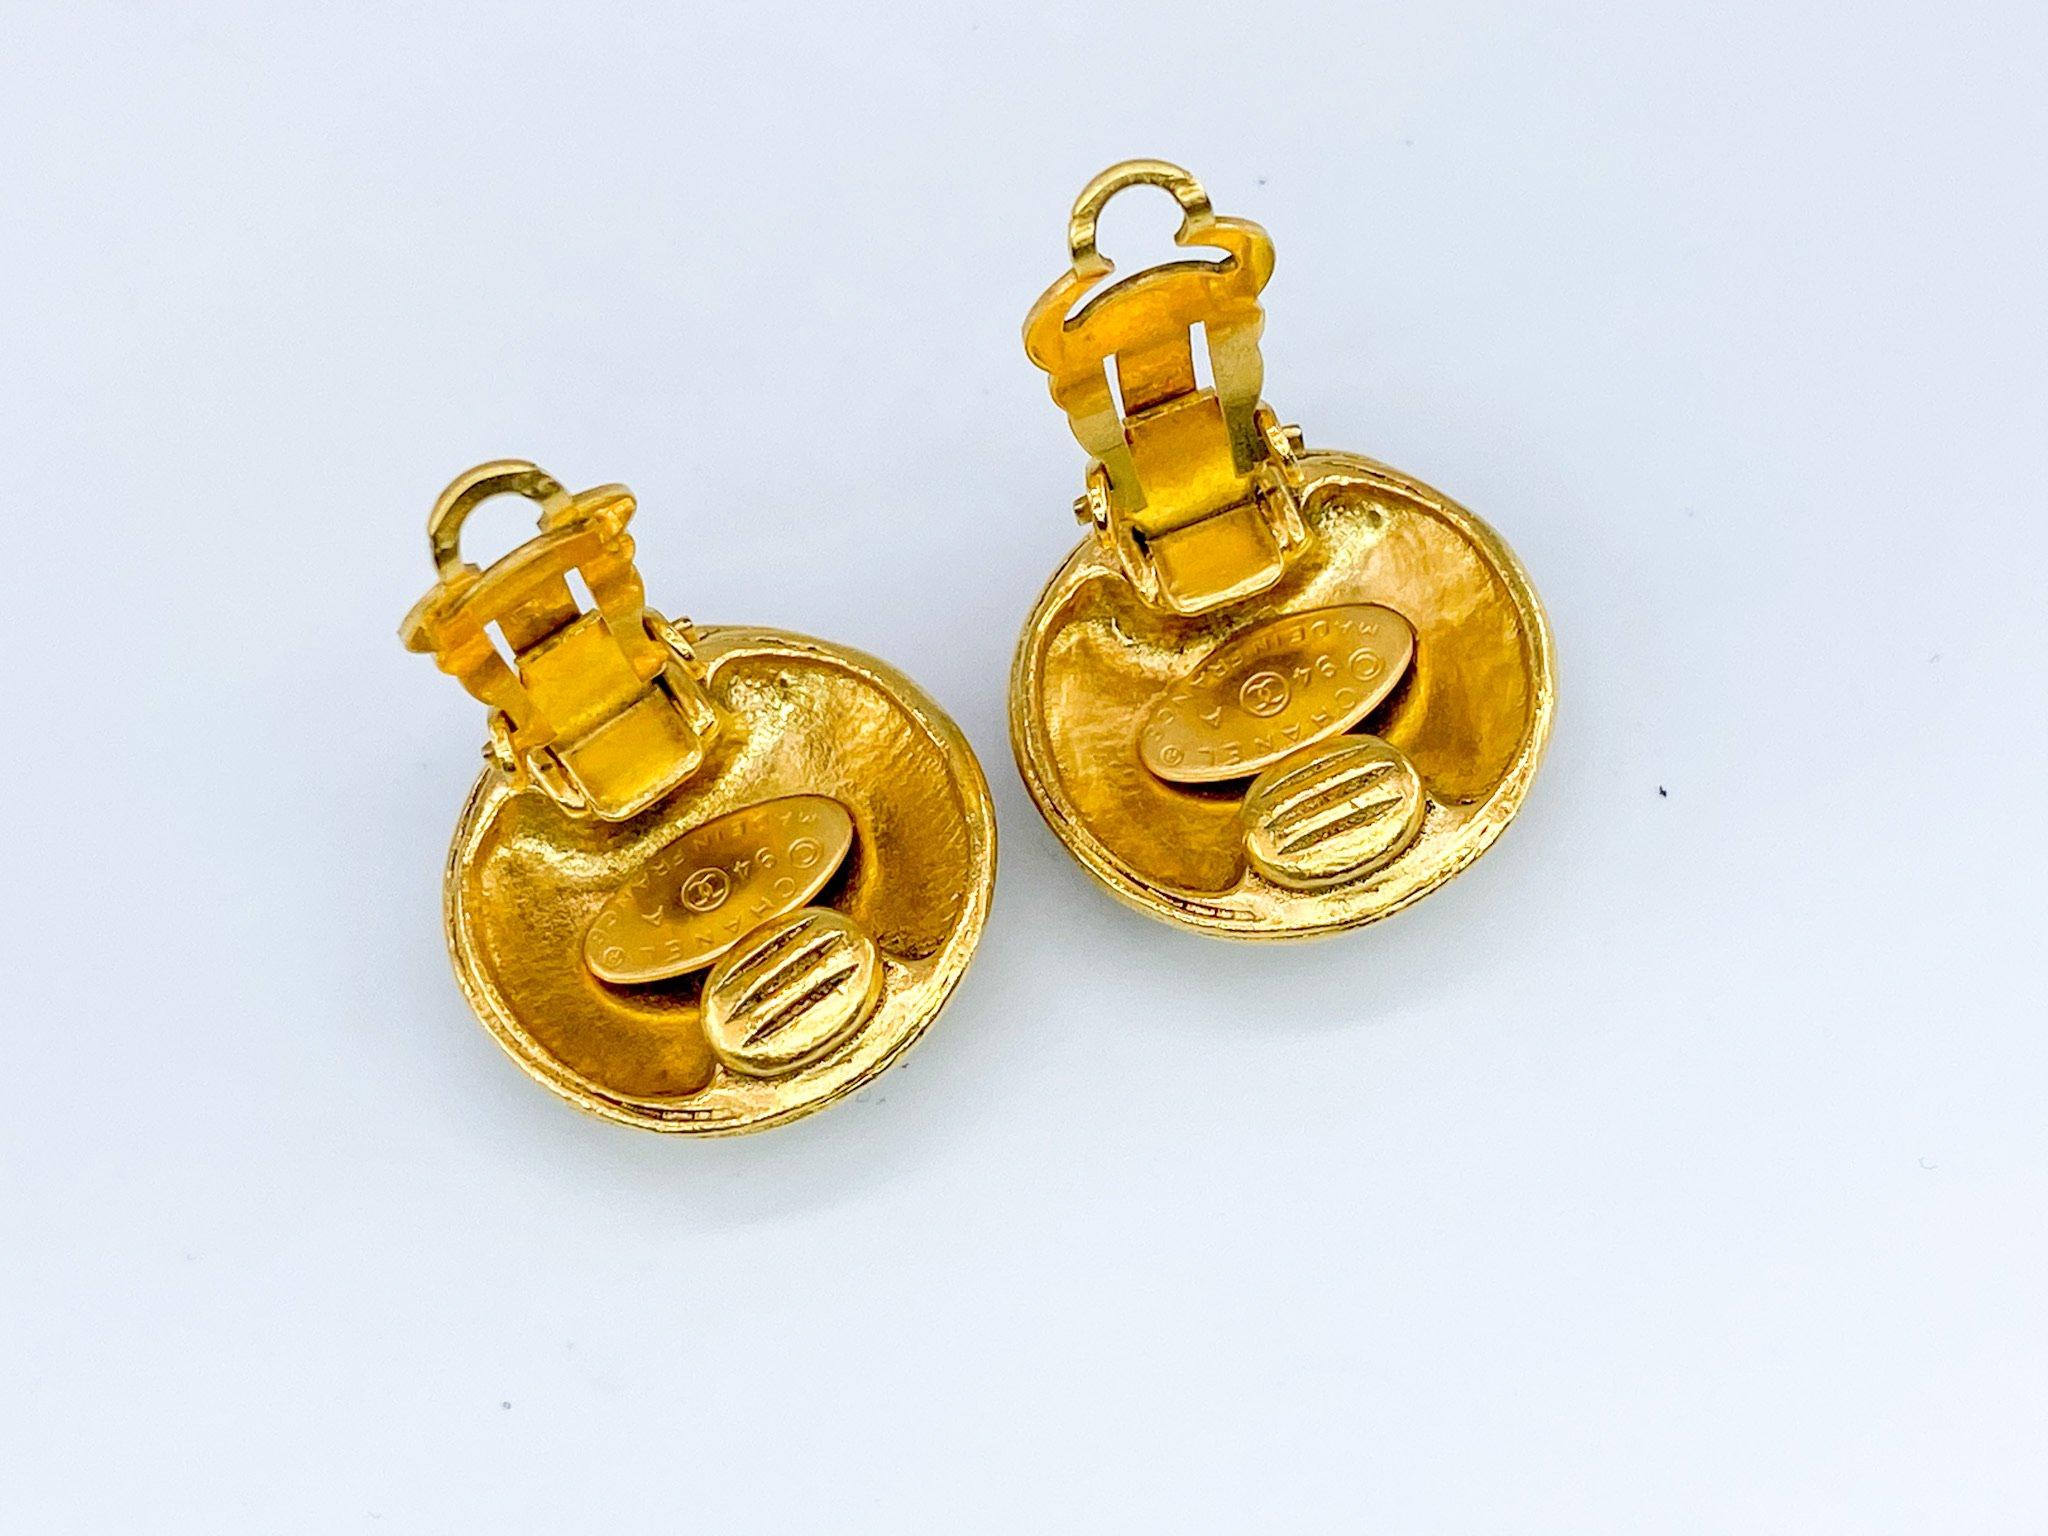 Chanel Vintage 1990s Clip on Earrings. 

Cast from gold plated metal and emblazoned with the all important chanel CC logo. Made for the 1994 Autumn Winter Collection. 

The 90s was an iconic era for Chanel with Victoire de Castellane at the